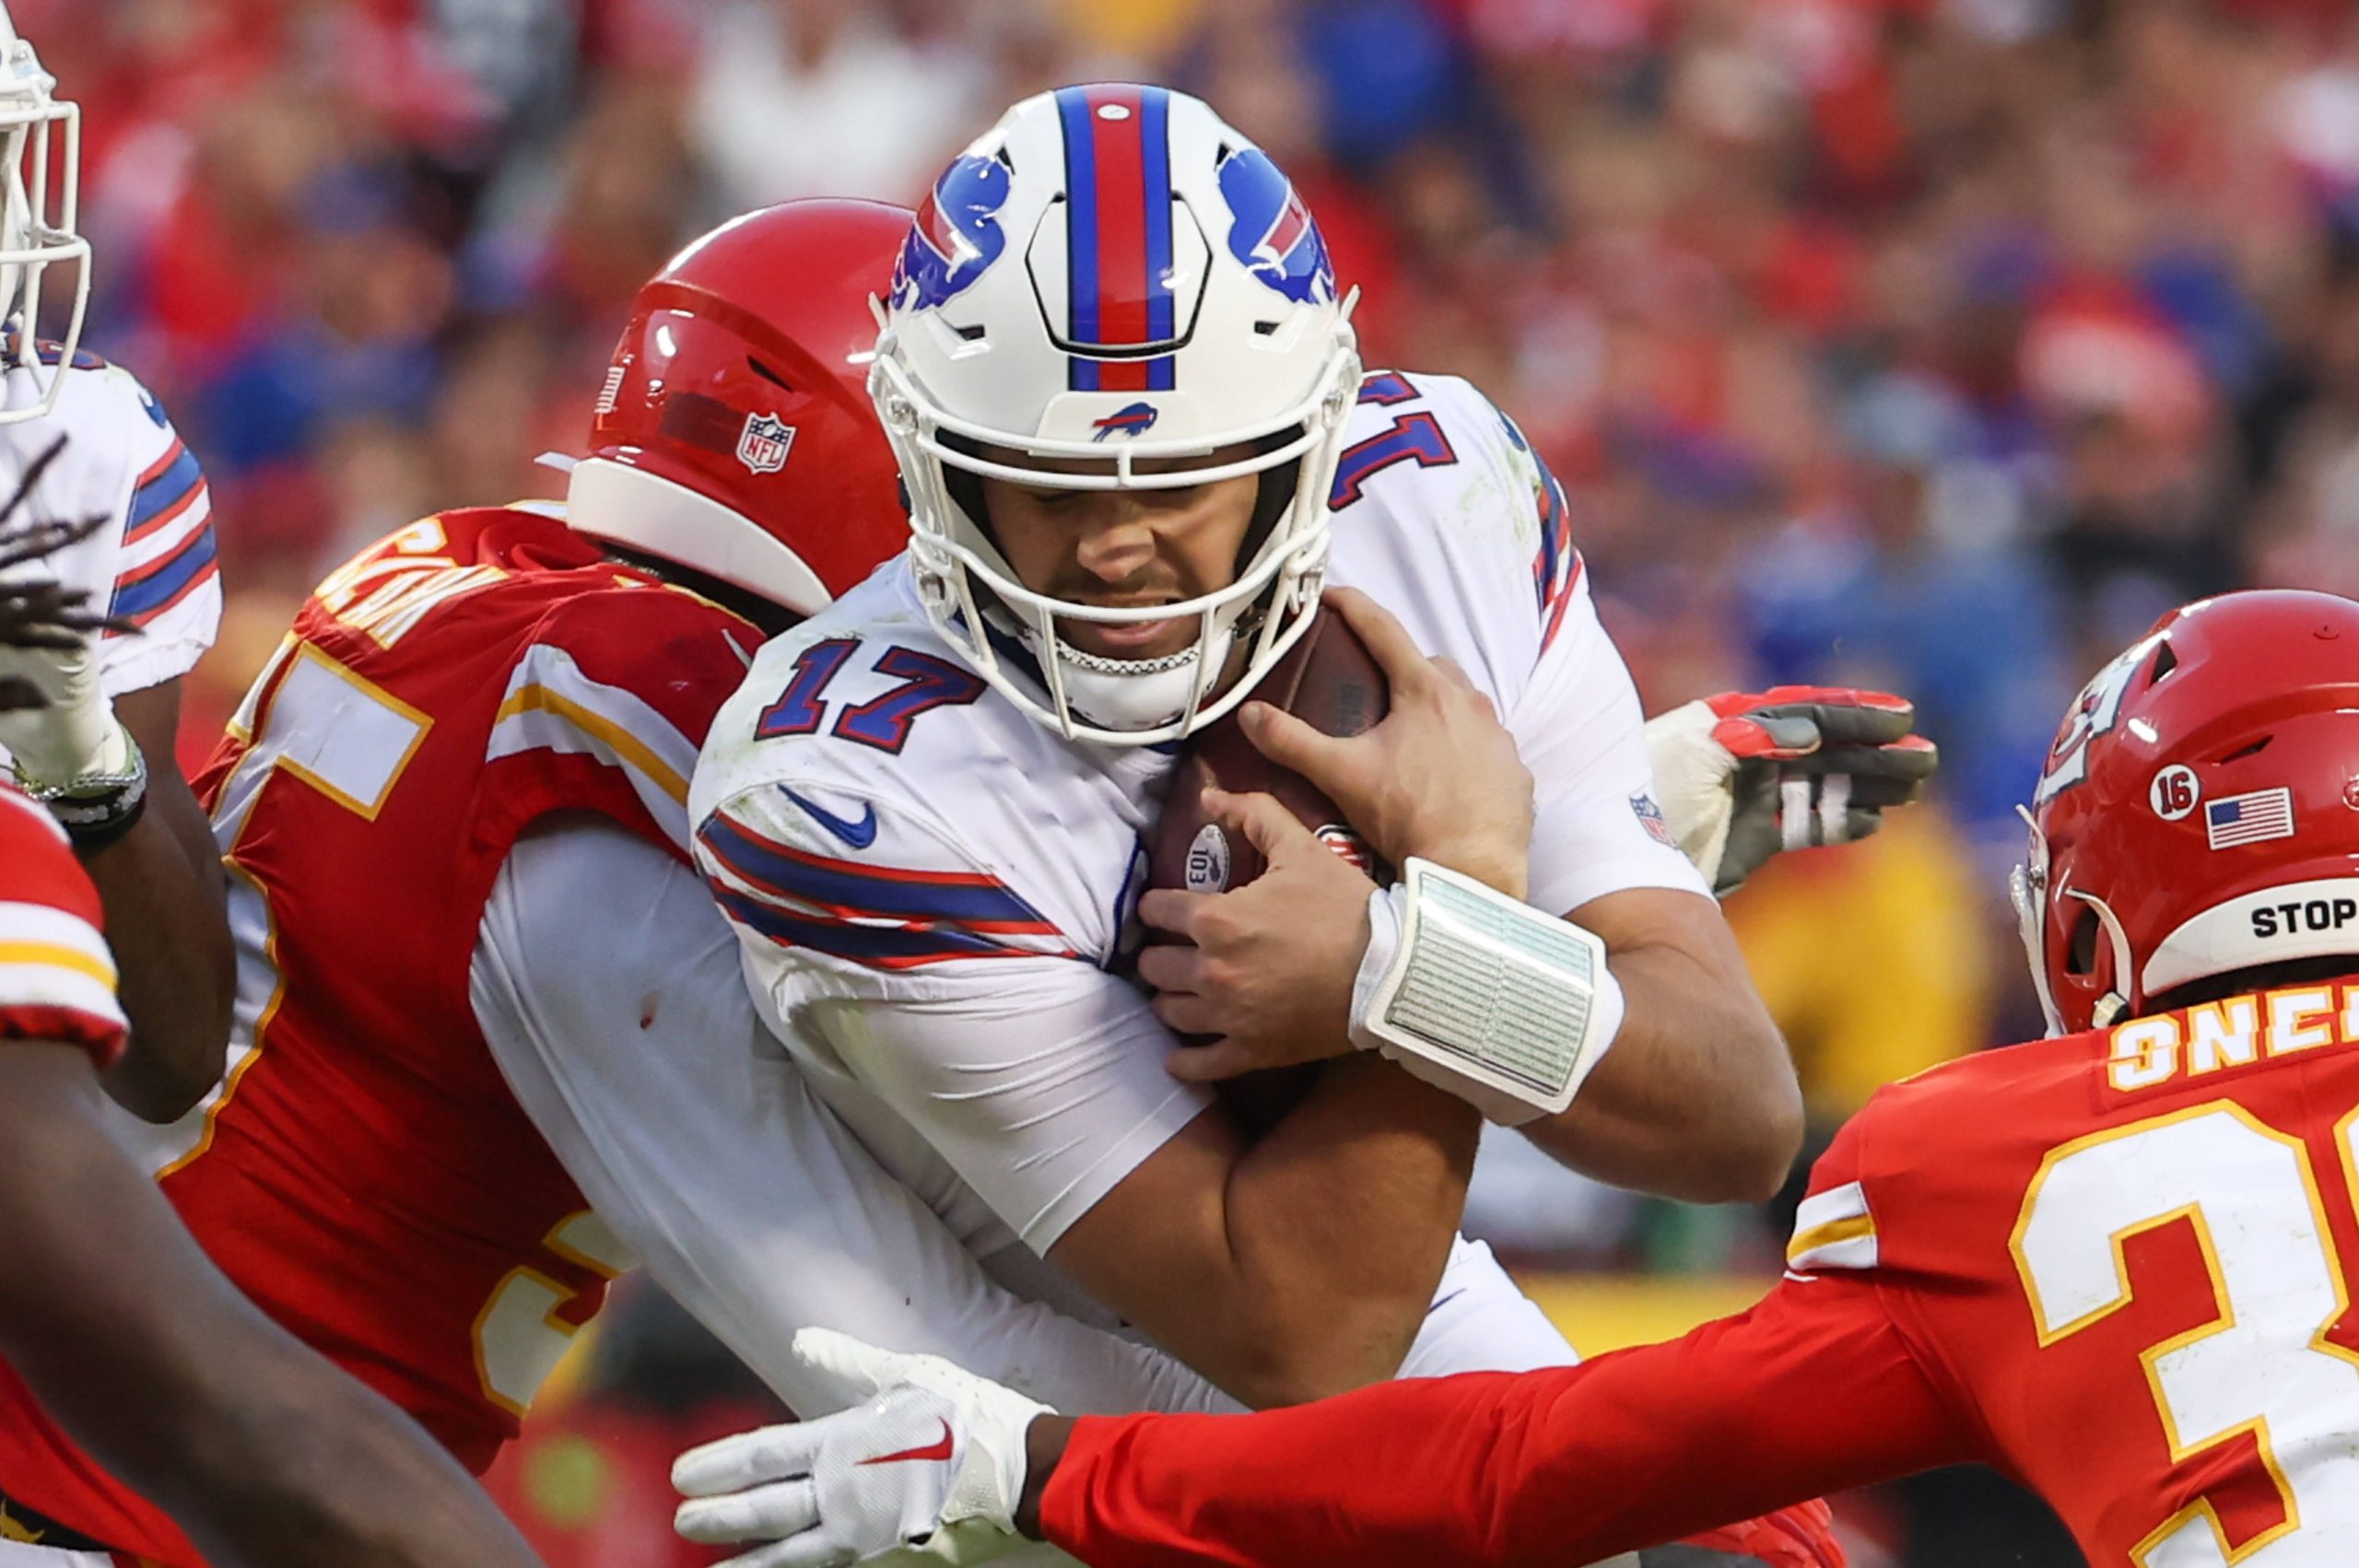 Josh Allen vs. Patrick Mahomes RTL NFL Woche 14 KANSAS CITY, MO - OCTOBER 16: Buffalo Bills quarterback Josh Allen 17 secures the ball as he is tackled in the fourth quarter of an NFL, American Football Herren, USA game between the Buffalo Bills and Kansas City Chiefs on October 16, 2022 at GEHA Field at Arrowhead Stadium in Kansas City, MO. Photo by Scott Winters/Icon Sportswire NFL: OCT 16 Bills at Chiefs Icon2210160840